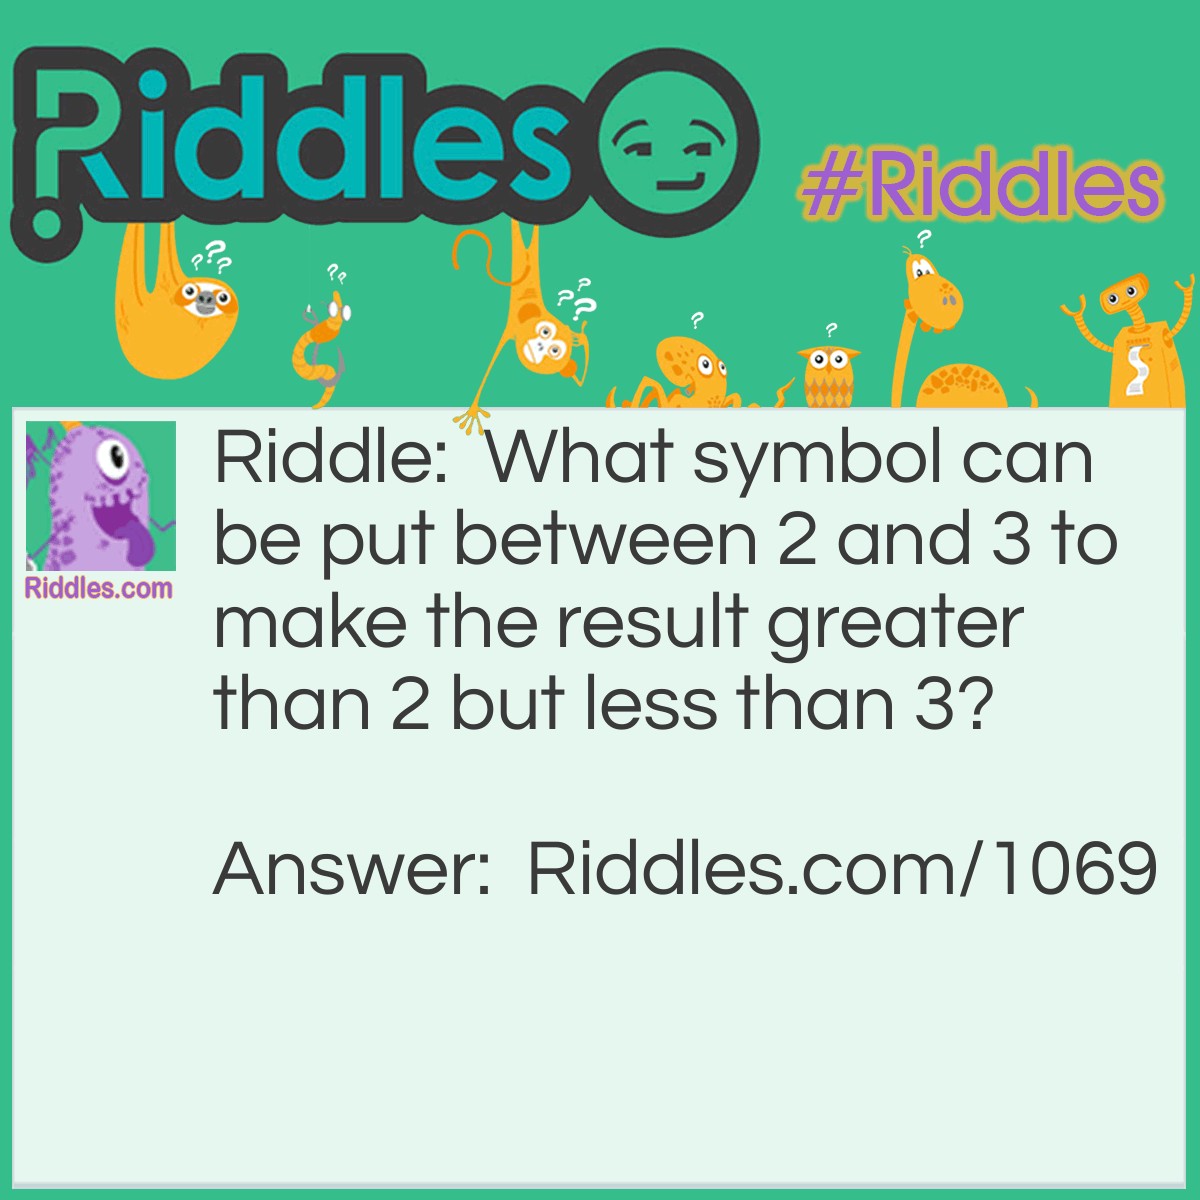 Riddle: What symbol can be put between 2 and 3 to make the result greater than 2 but less than 3? Answer: A decimal point